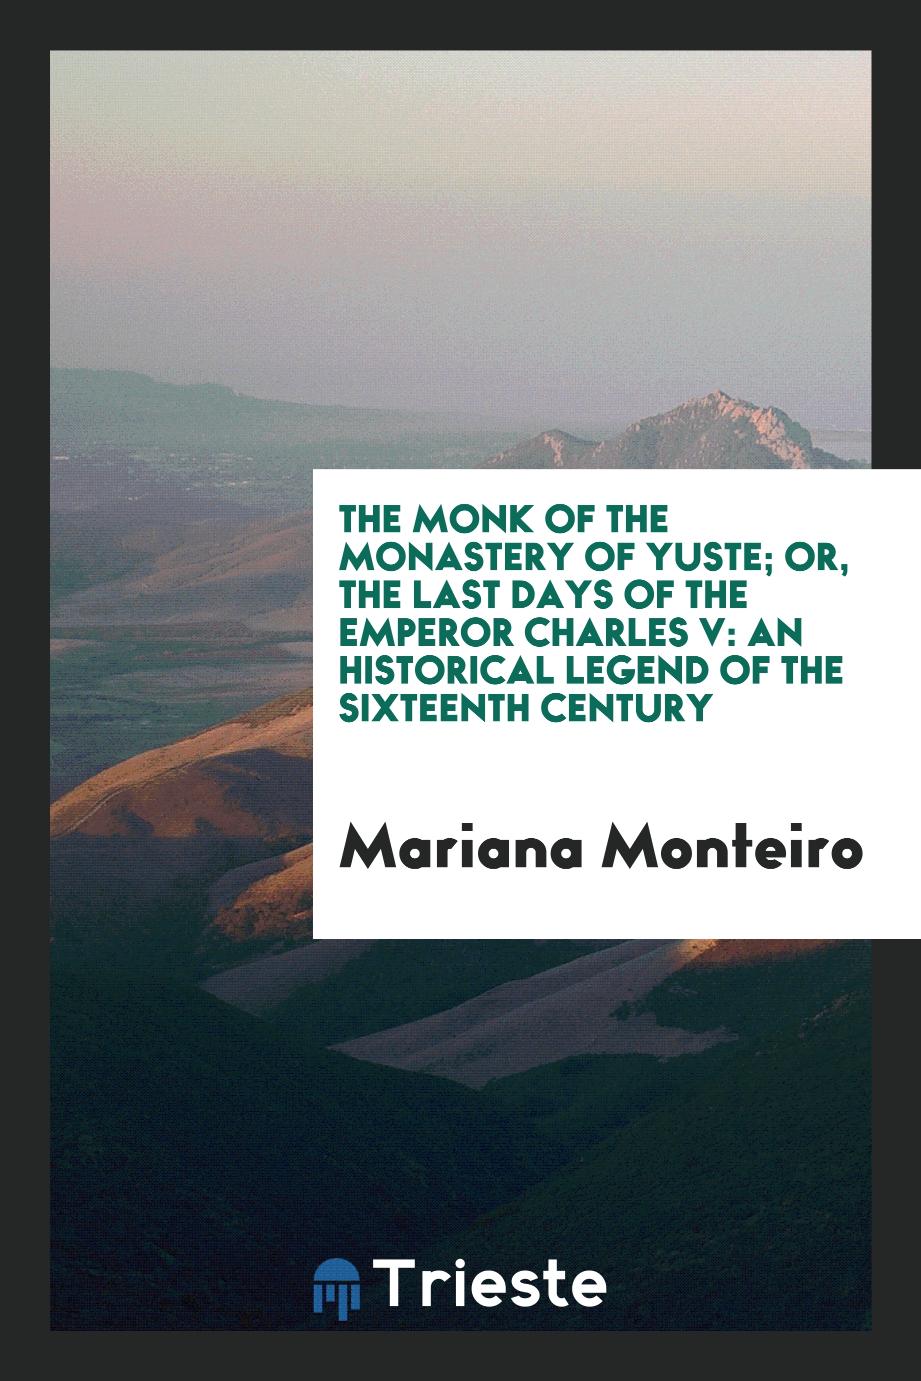 The Monk of the Monastery of Yuste; Or, The Last Days of the Emperor Charles V: An Historical Legend of the Sixteenth Century